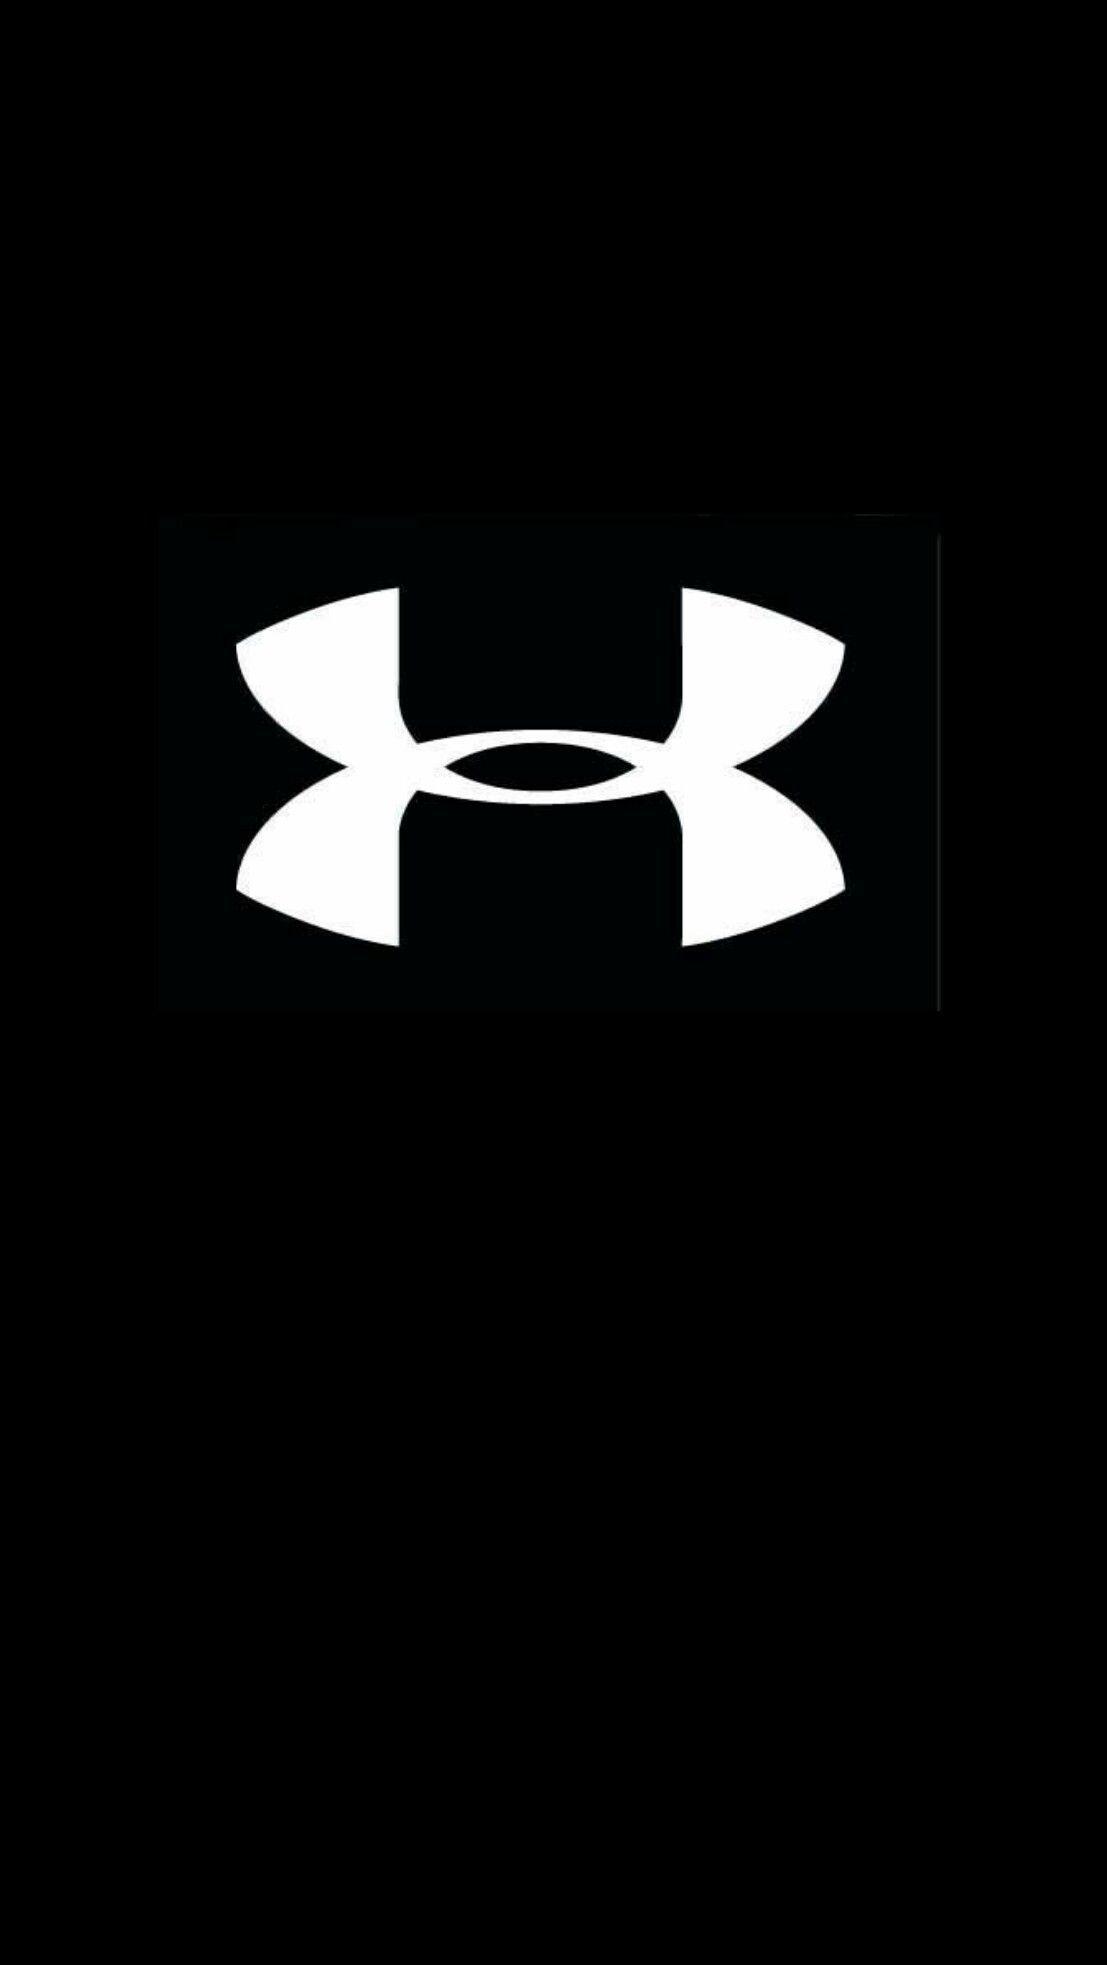 Cool Under Armour Basketball Logo - underarmour #black #wallpaper #iPhone #android | Under Armor in 2019 ...